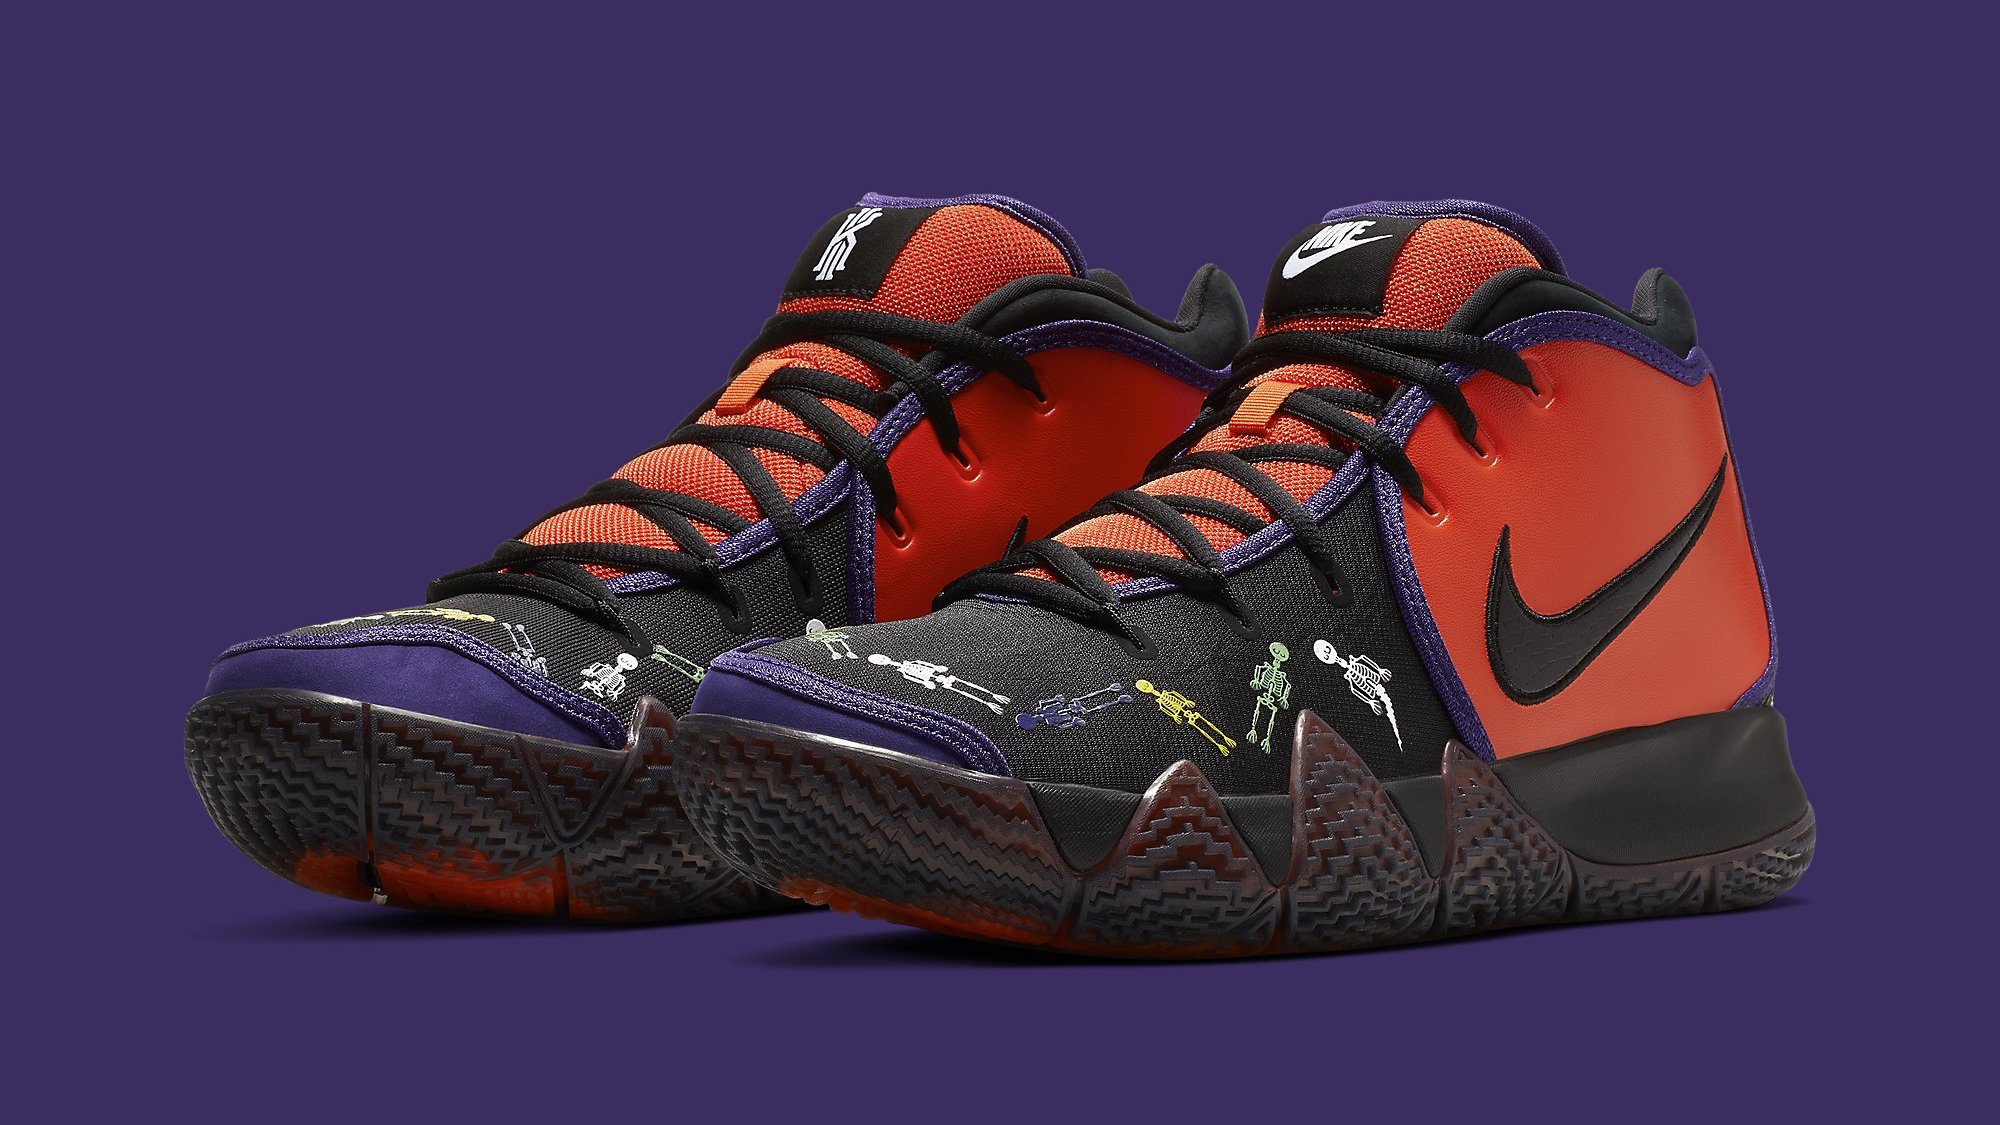 Nike Kyrie 4 'Day of the Dead' CI0278 